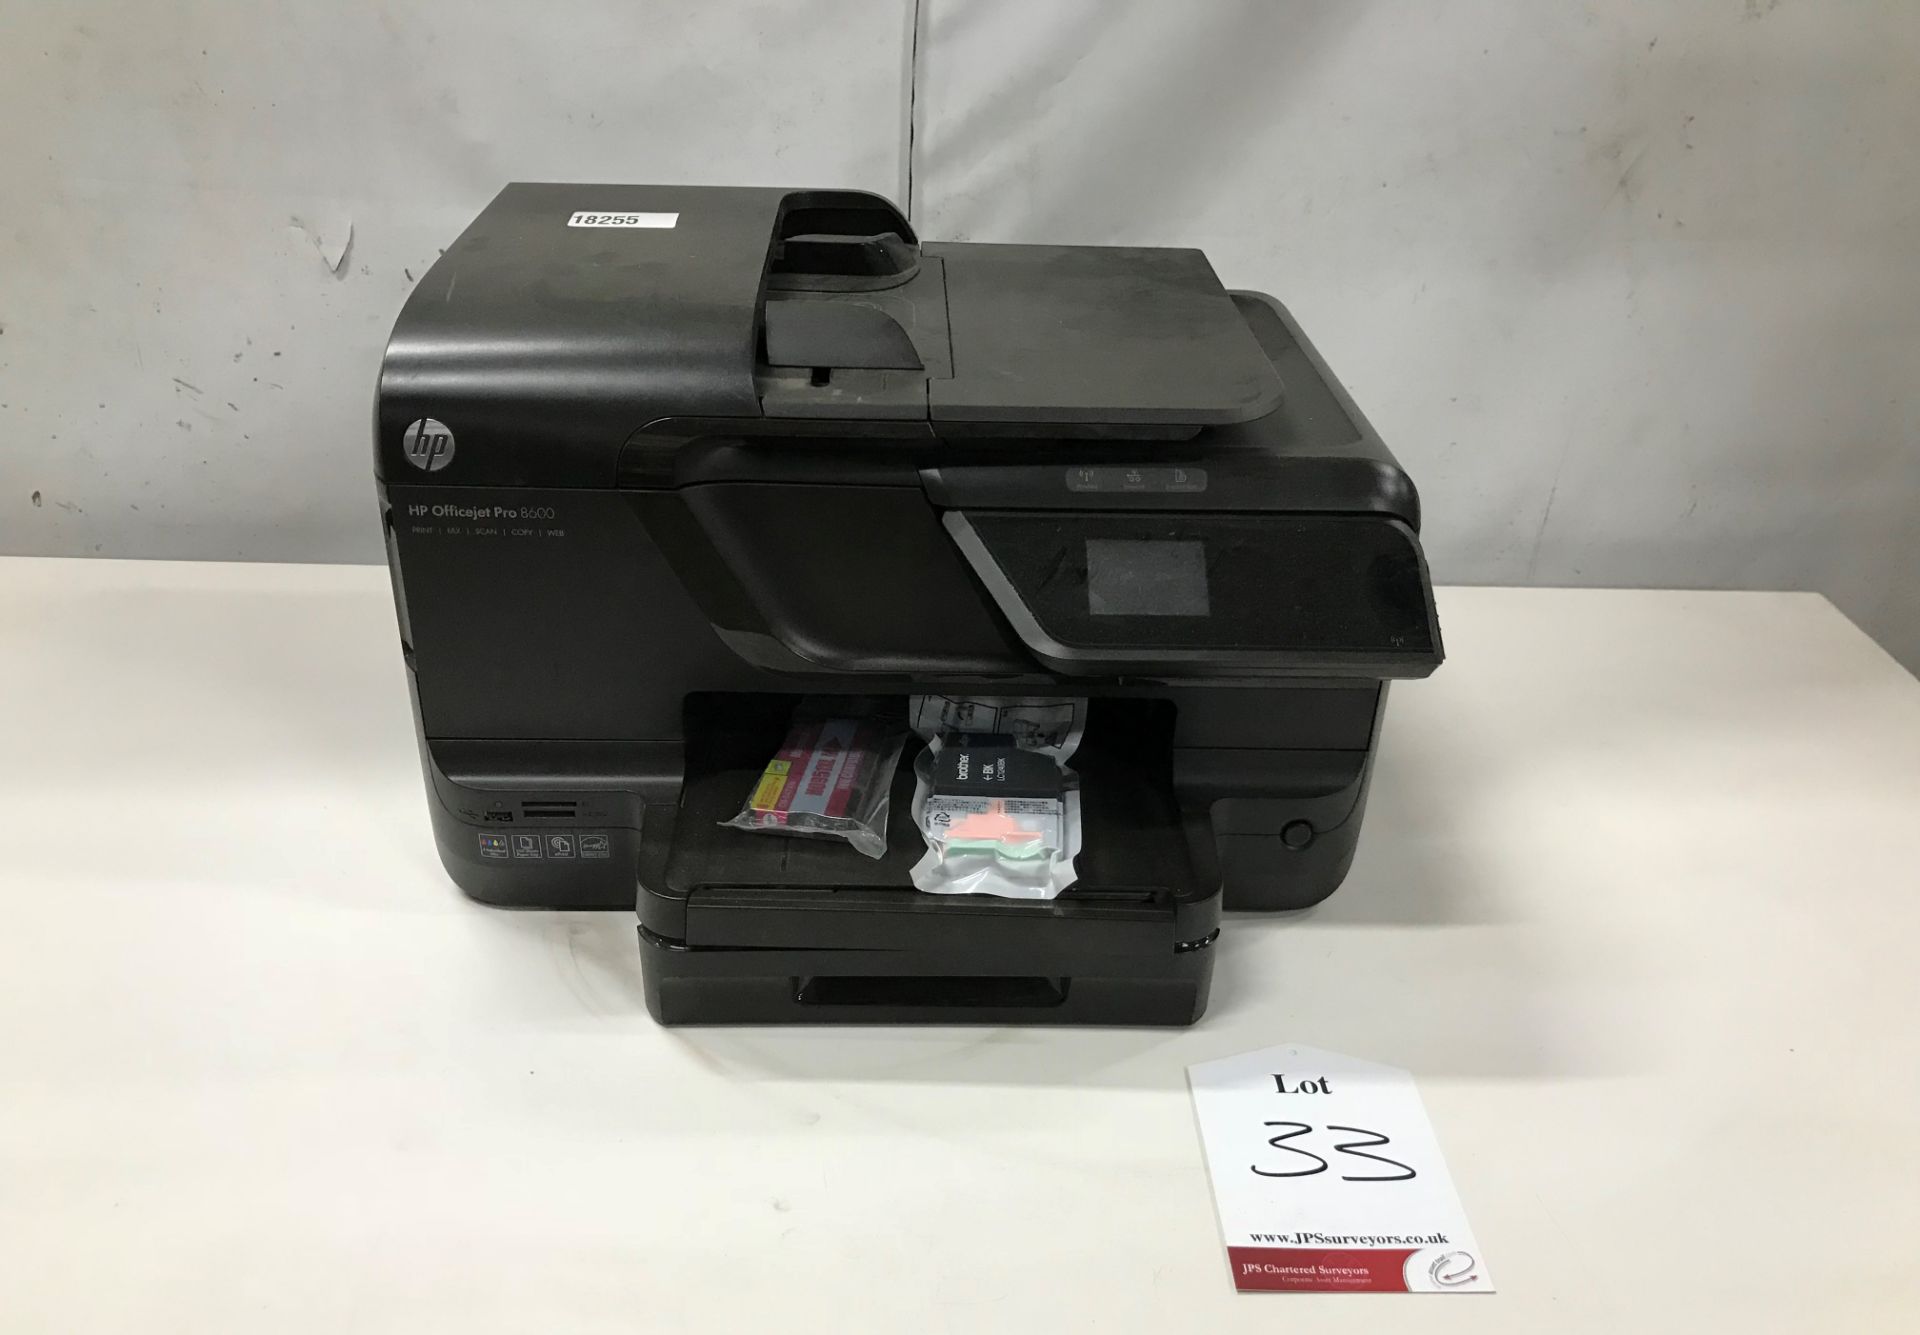 Hp Officejet Pro 8600 e-All-in-One Printer